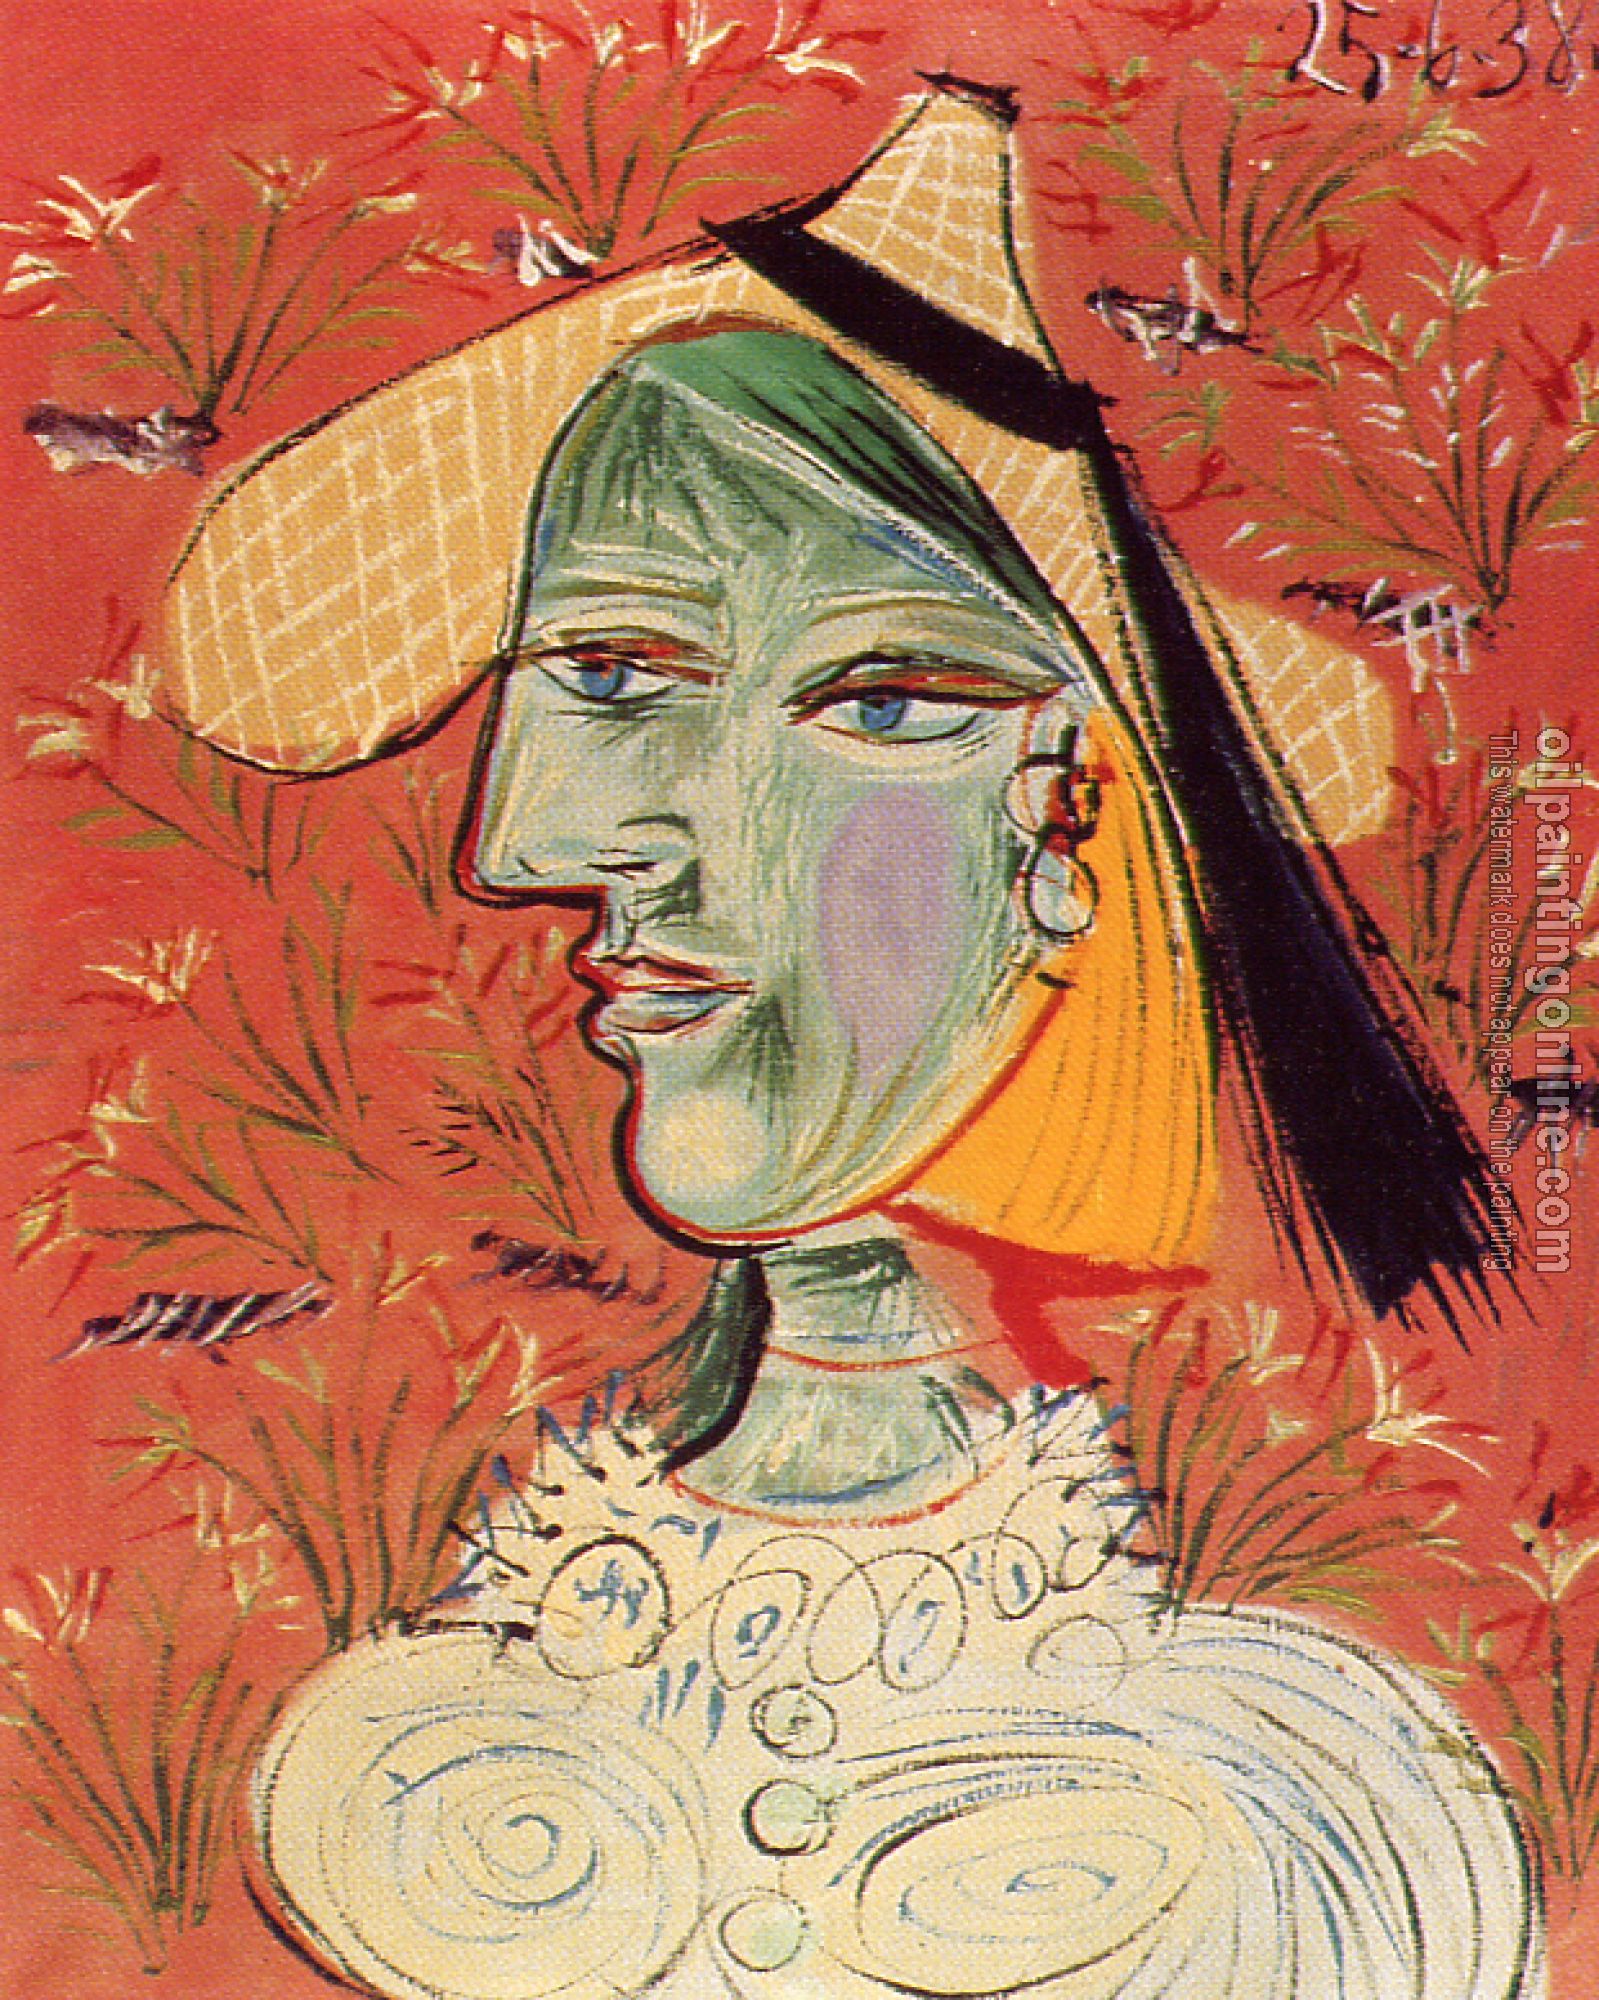 Picasso, Pablo - woman in a straw hat against a flowered background